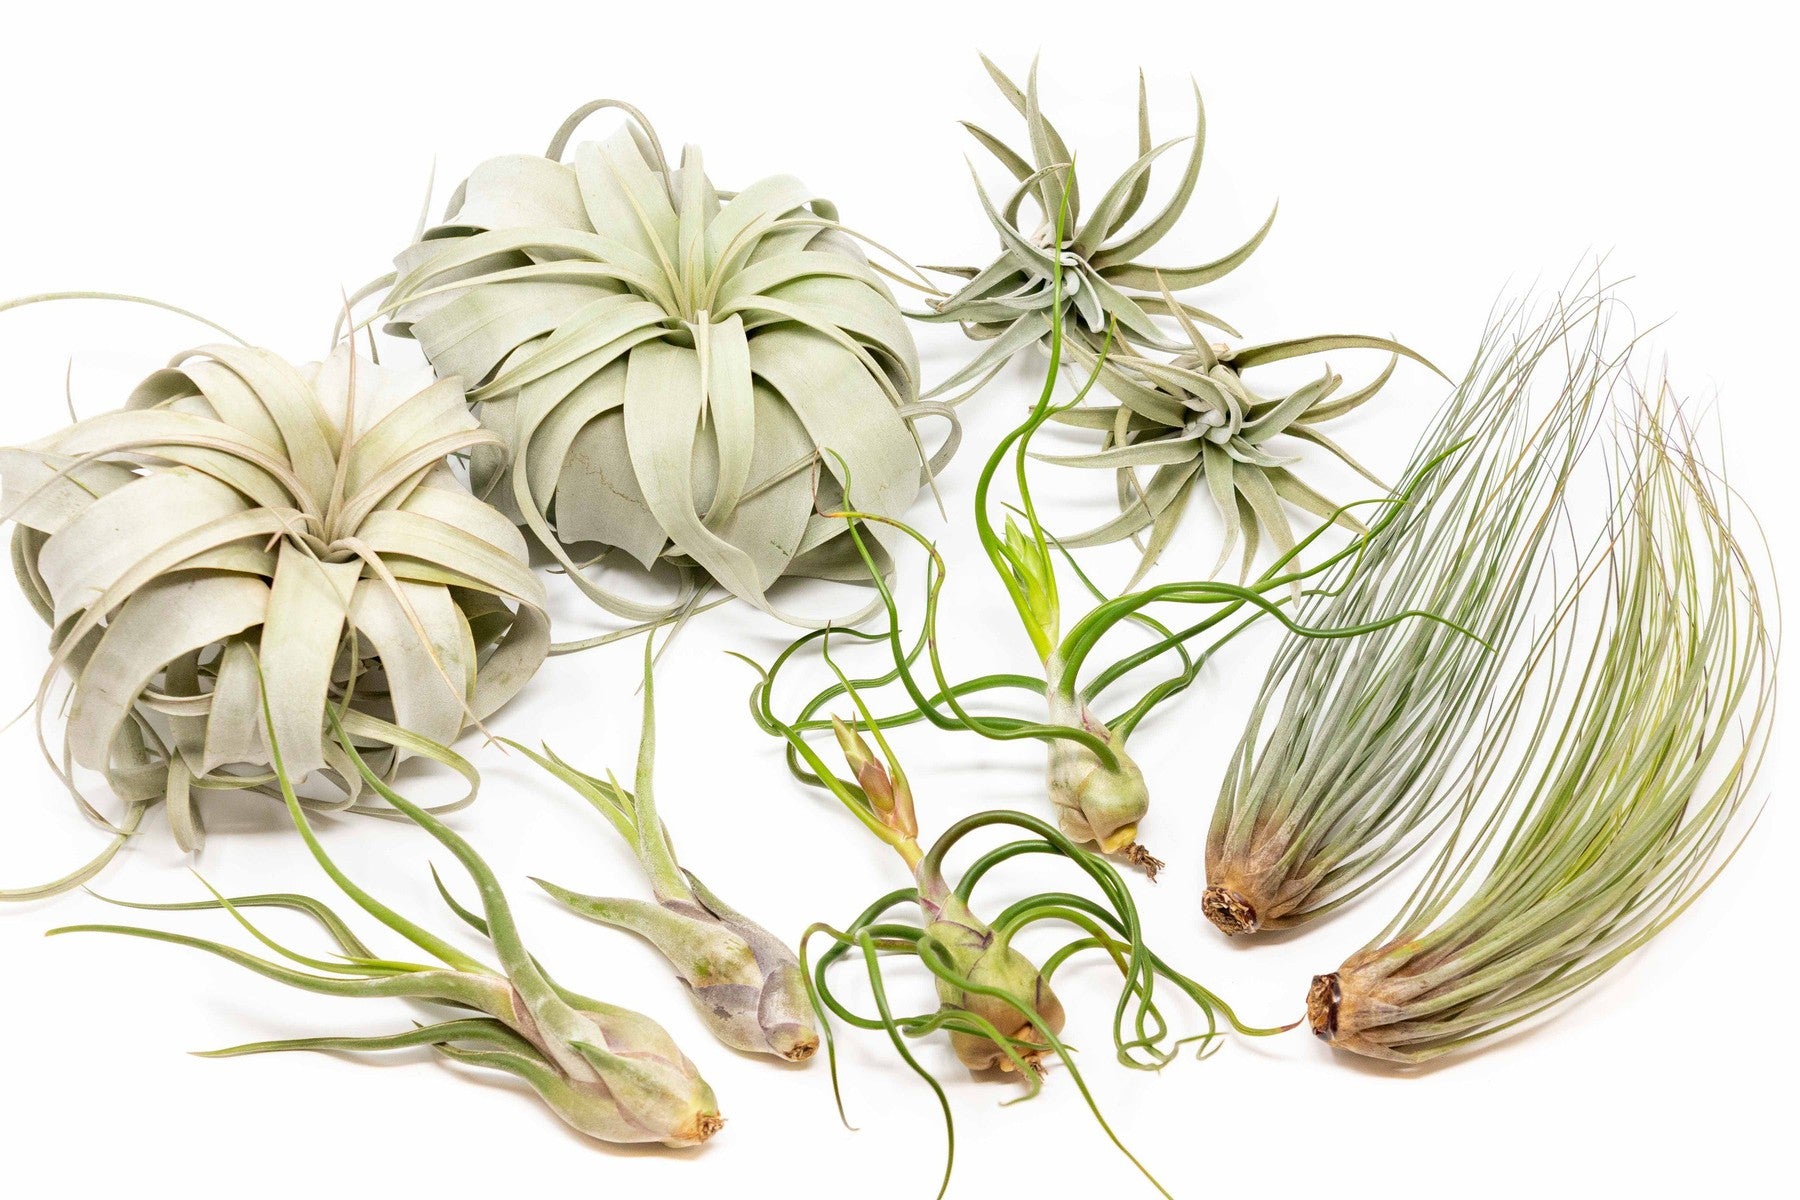 SALE - Large Tillandsia Air Plant Variety - Set of 10, 15, or 20 - 40% Off-airplant-The Succulent Source